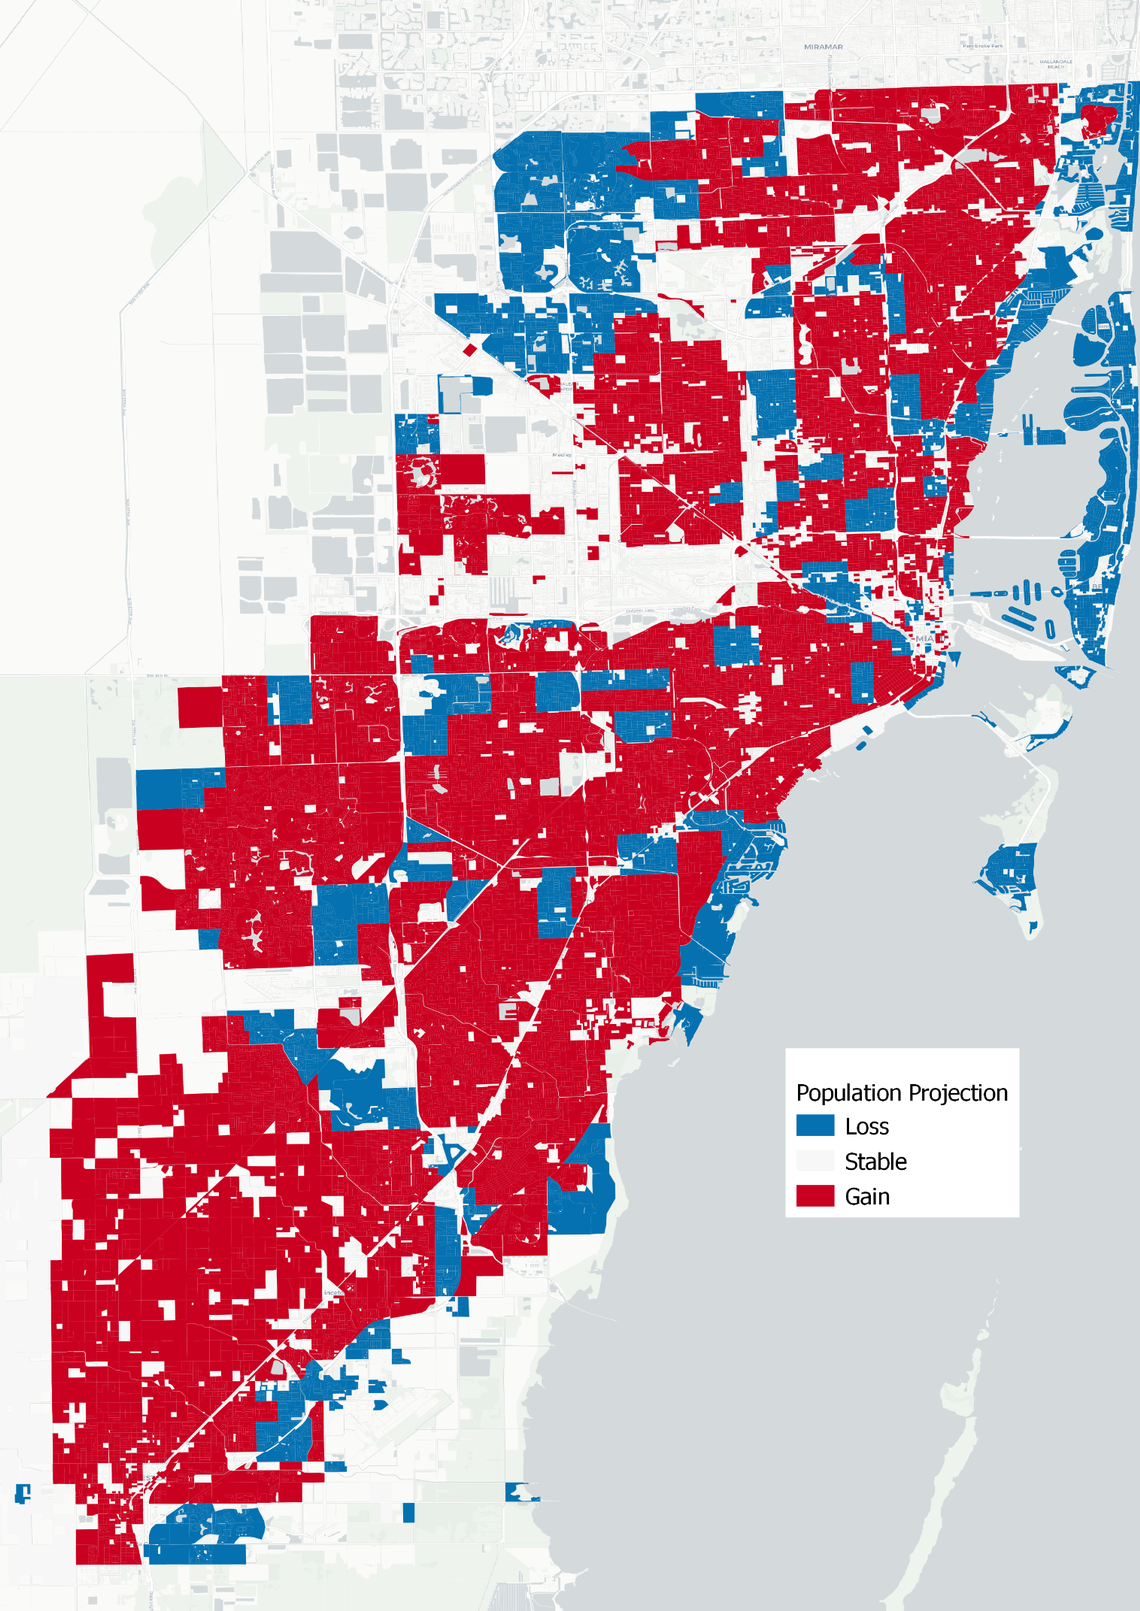 This map suggests the places in Miami-Dade County that could see population growth (in red) or decline (in blue) over the next few decades as sea level-rise induced flooding begins to affect property values.